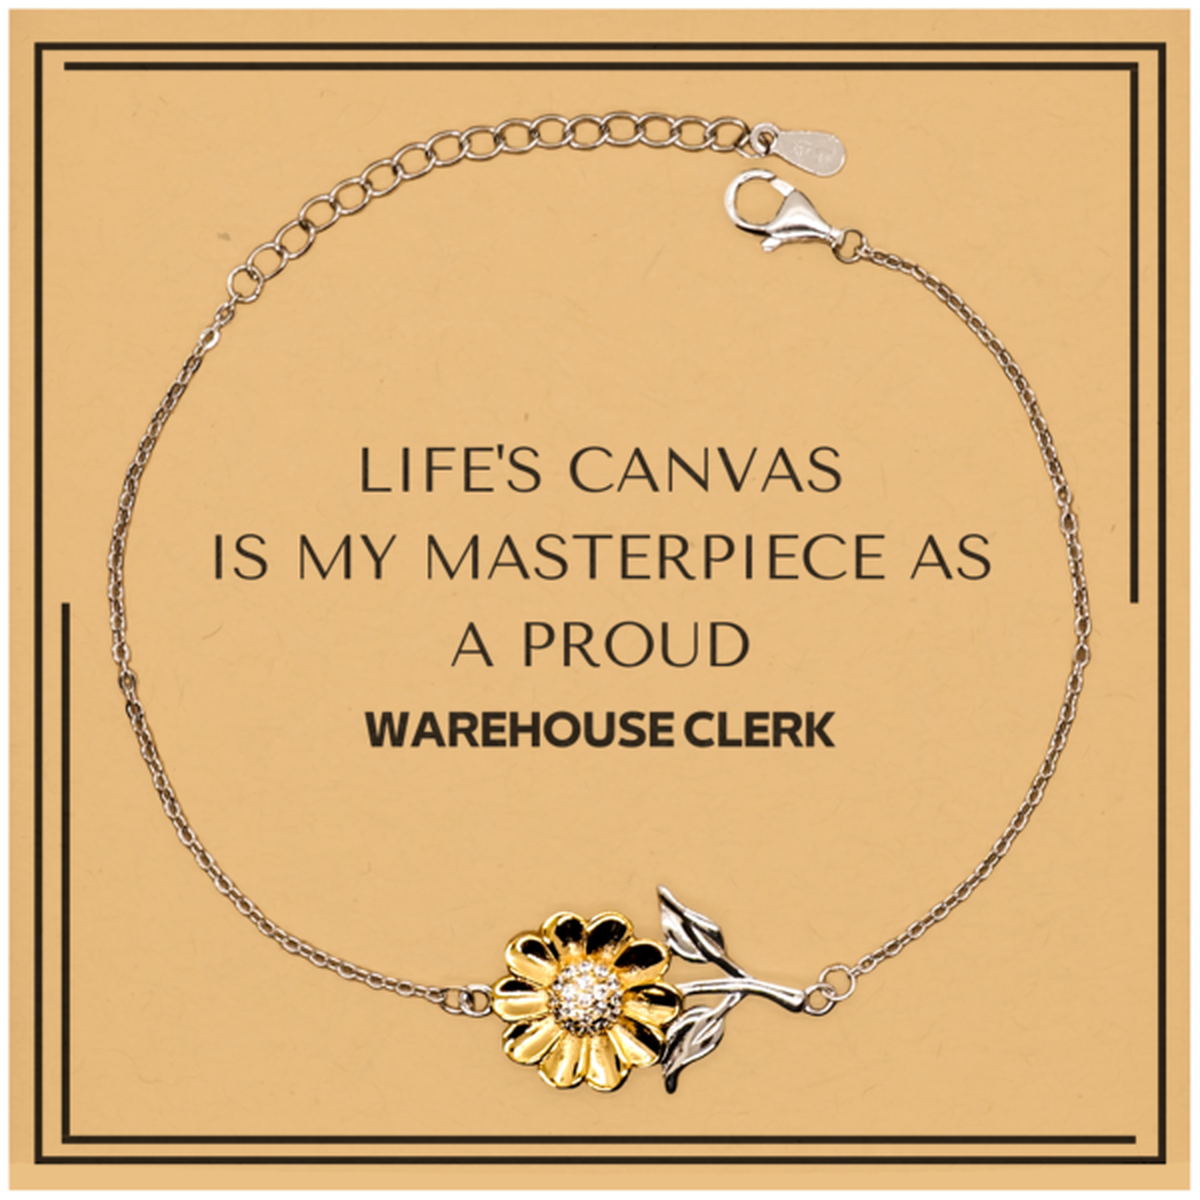 Proud Warehouse Clerk Gifts, Life's canvas is my masterpiece, Epic Birthday Christmas Unique Sunflower Bracelet For Warehouse Clerk, Coworkers, Men, Women, Friends